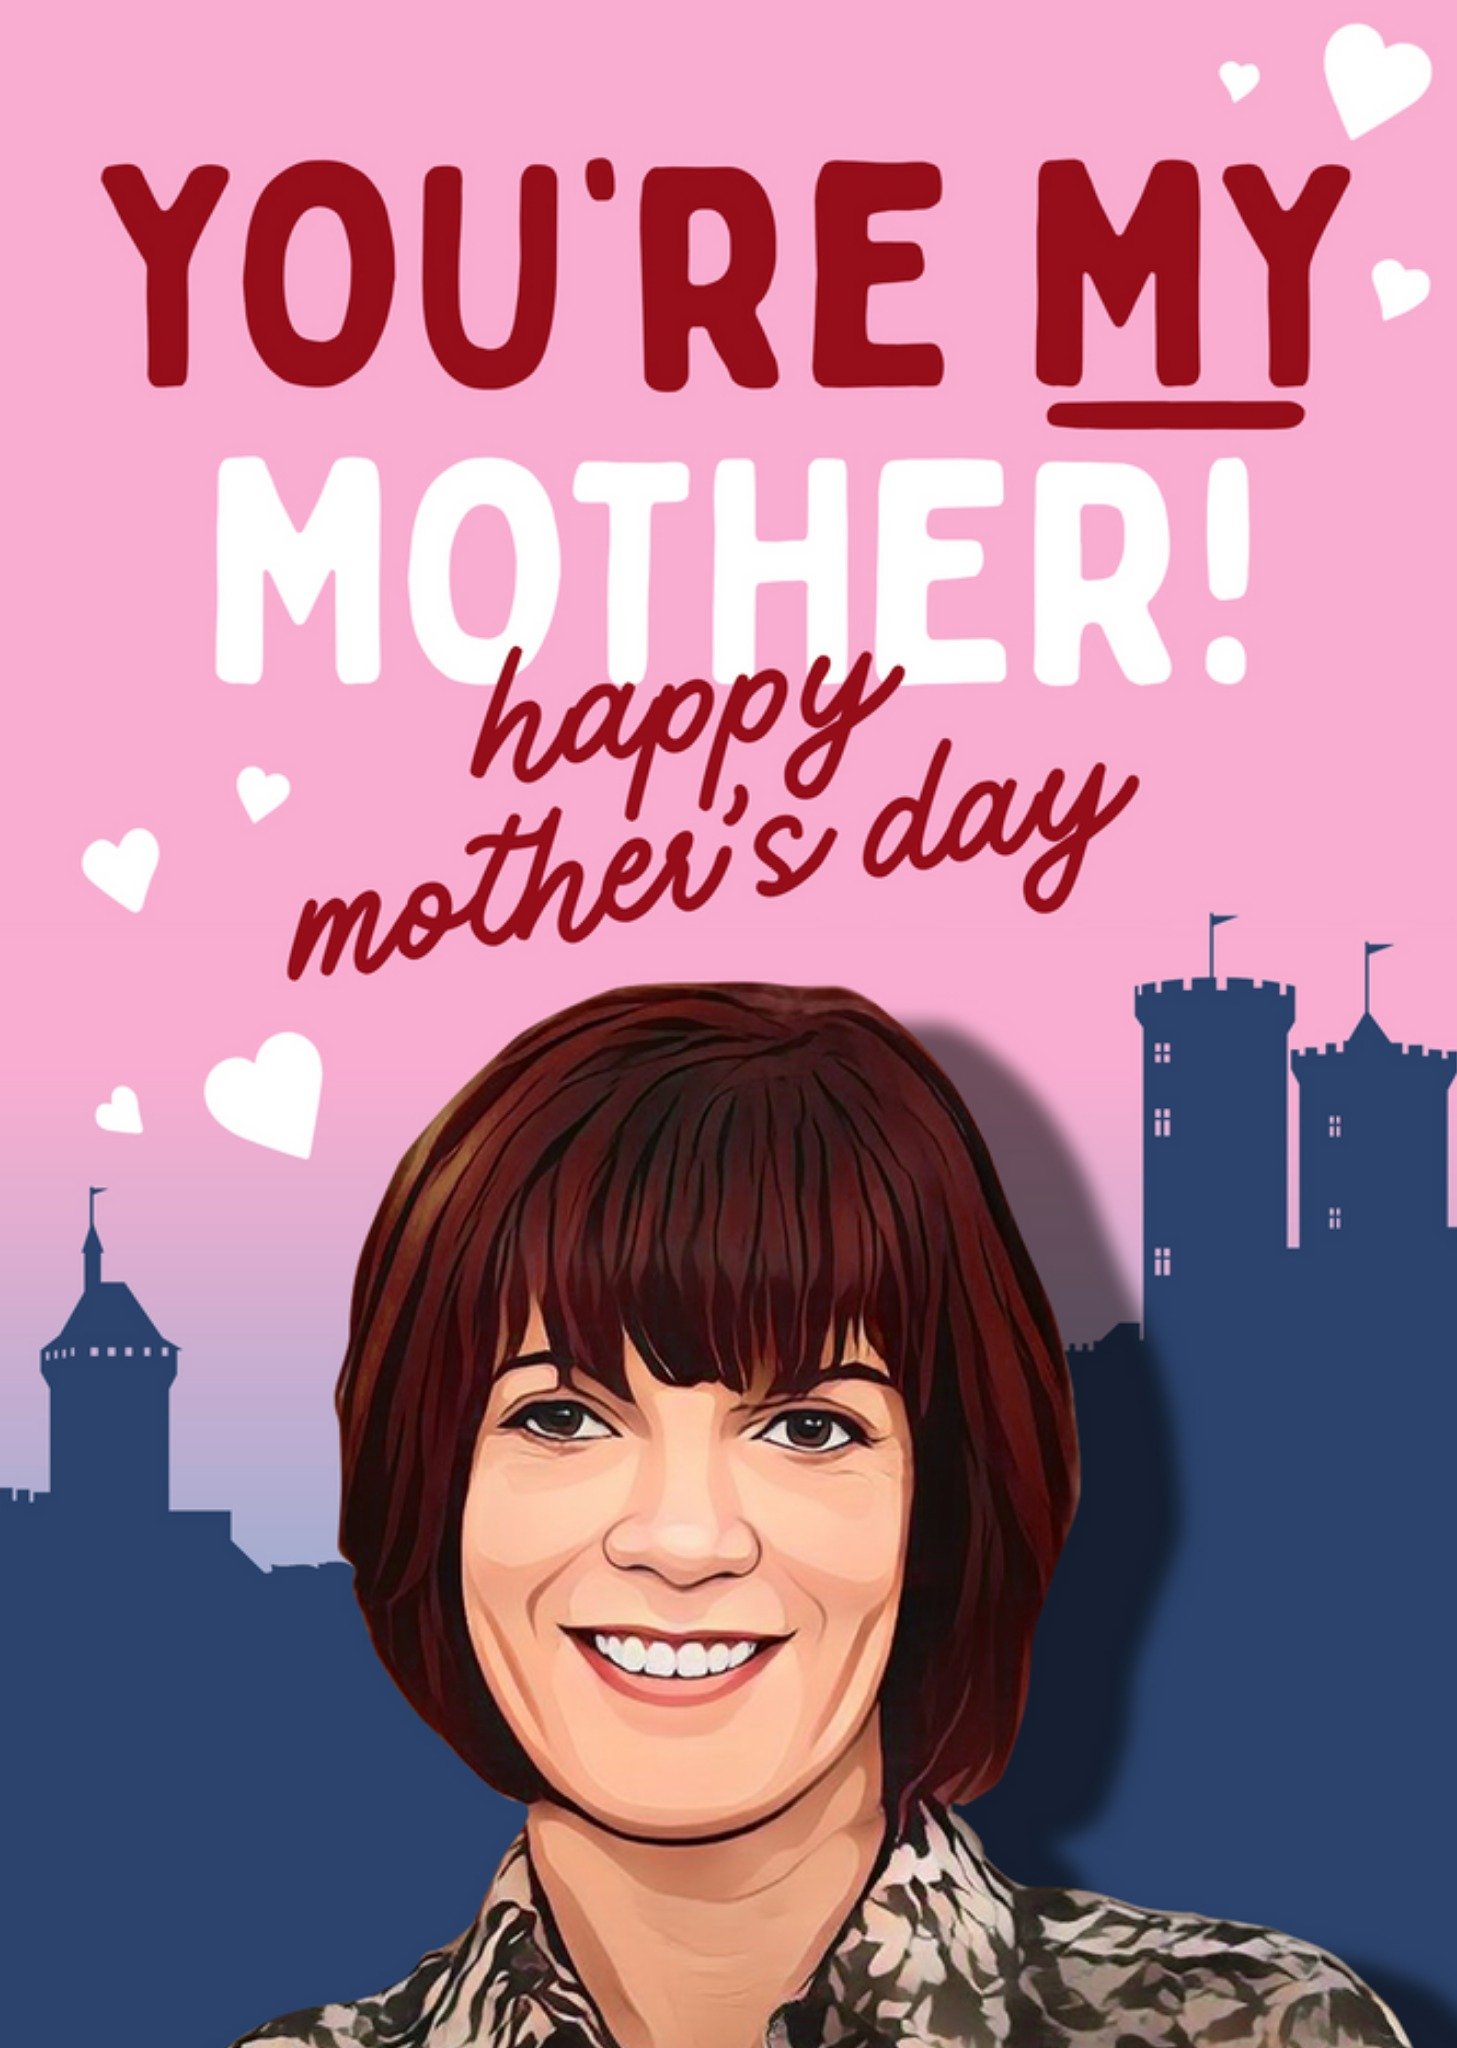 Moonpig Funny Topical Faithful You're My Mother Mother's Day Card, Large